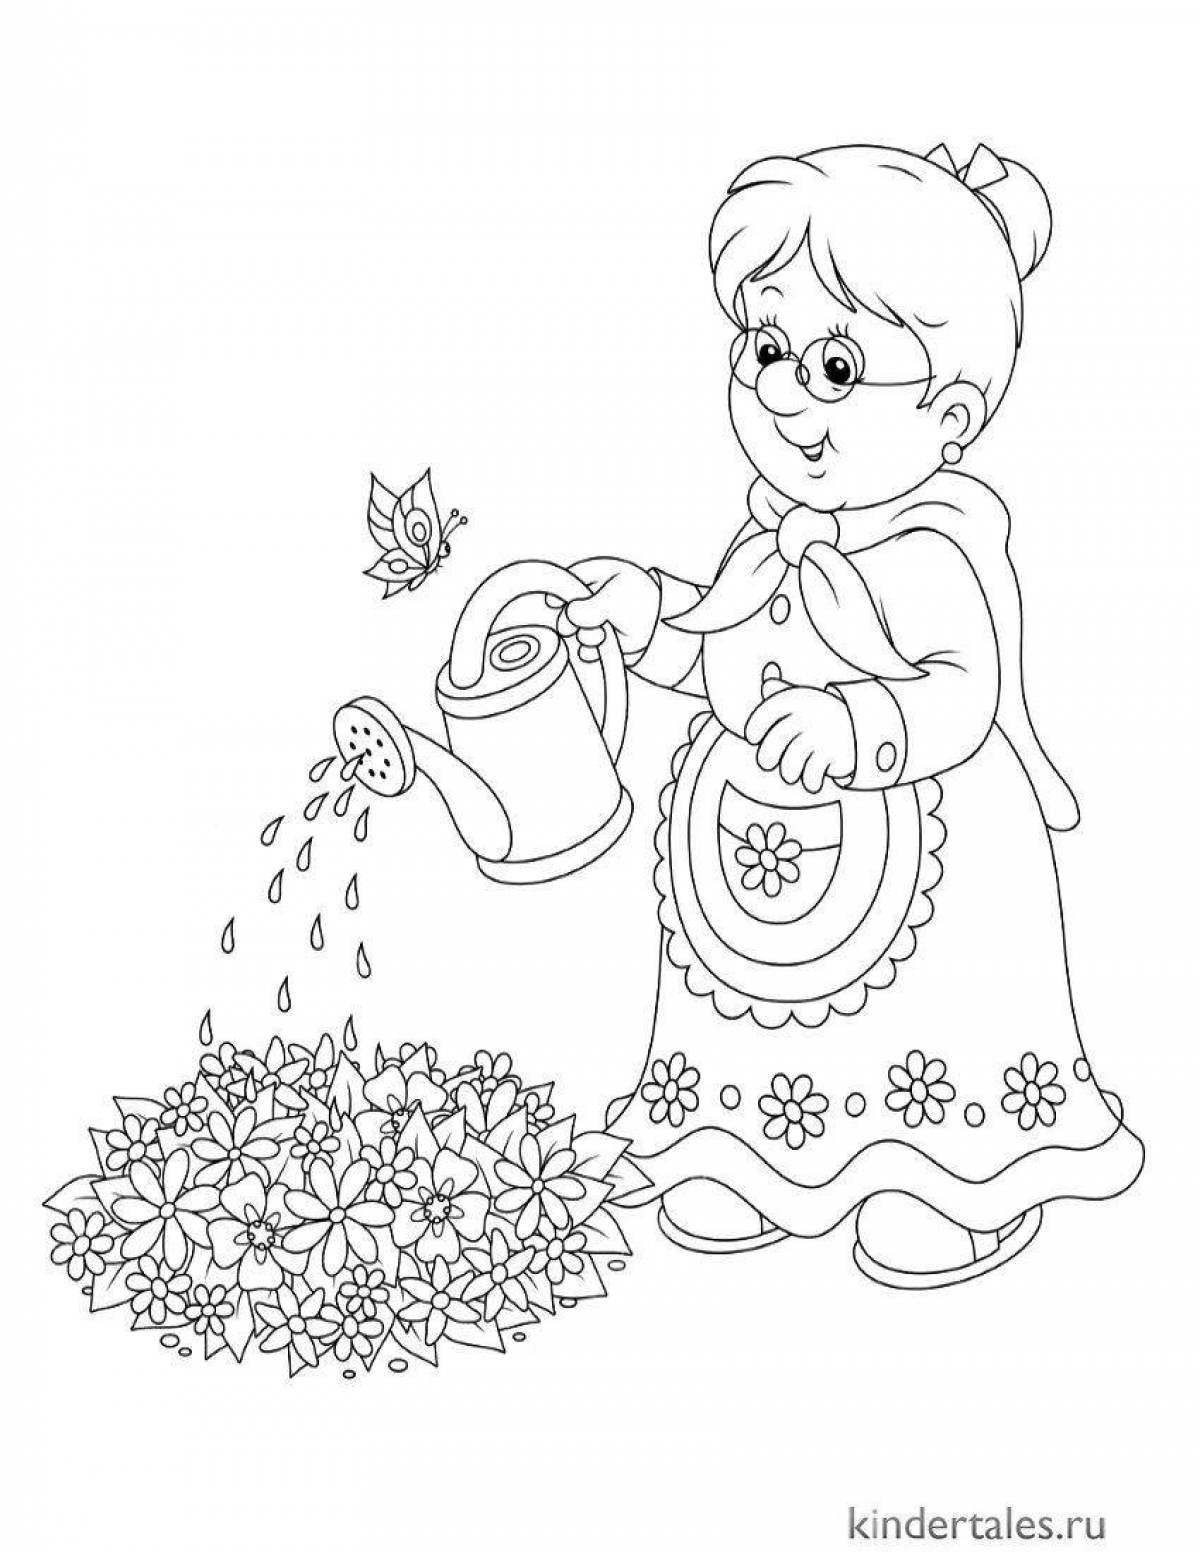 Cute grandmother and granddaughter coloring pages